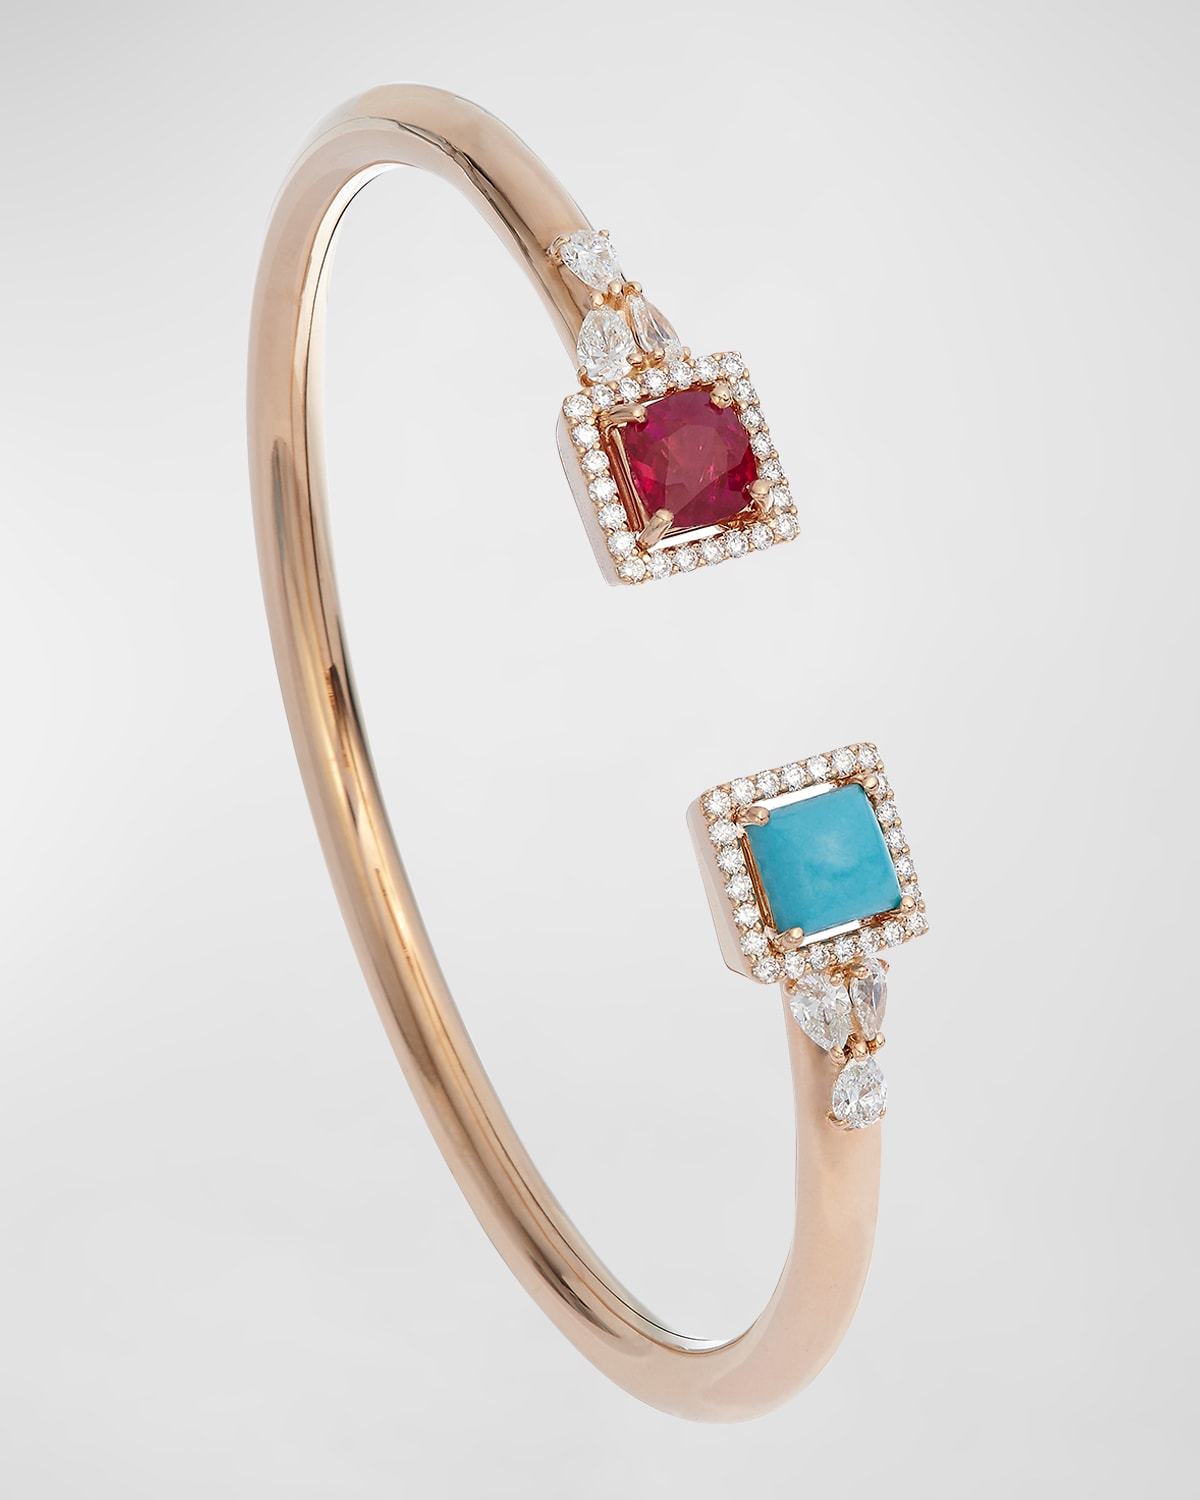 Krisonia 18k Yellow Gold Cuff With Ruby, Turquoise And Diamonds